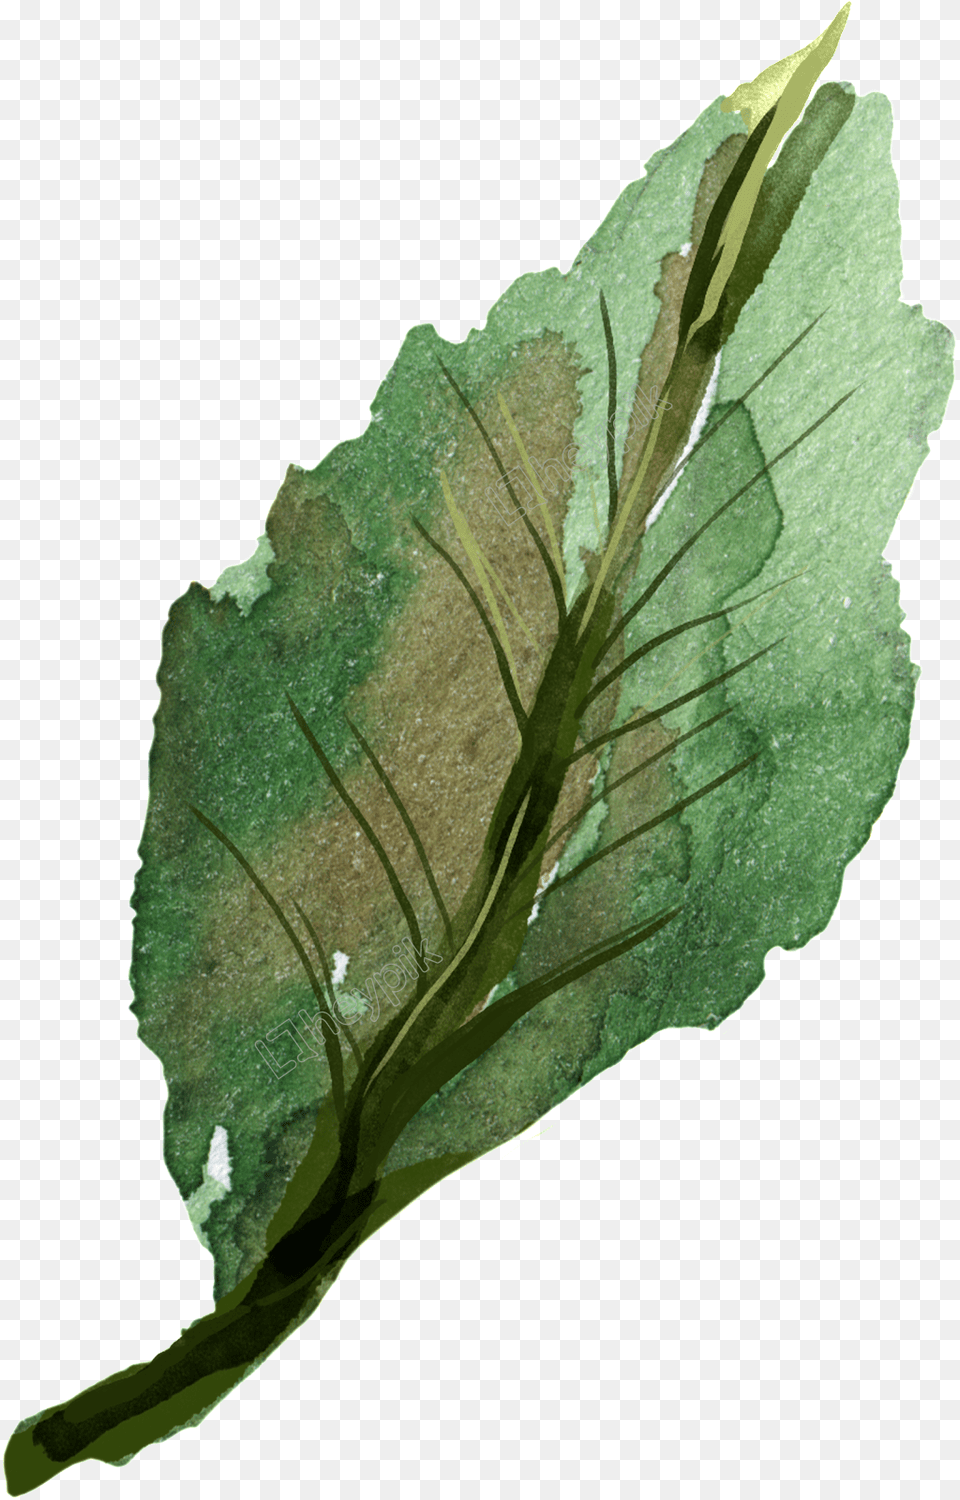 Hand Painted Watercolor Leaf Decoration Free Download Watercolor Painting, Plant Png Image